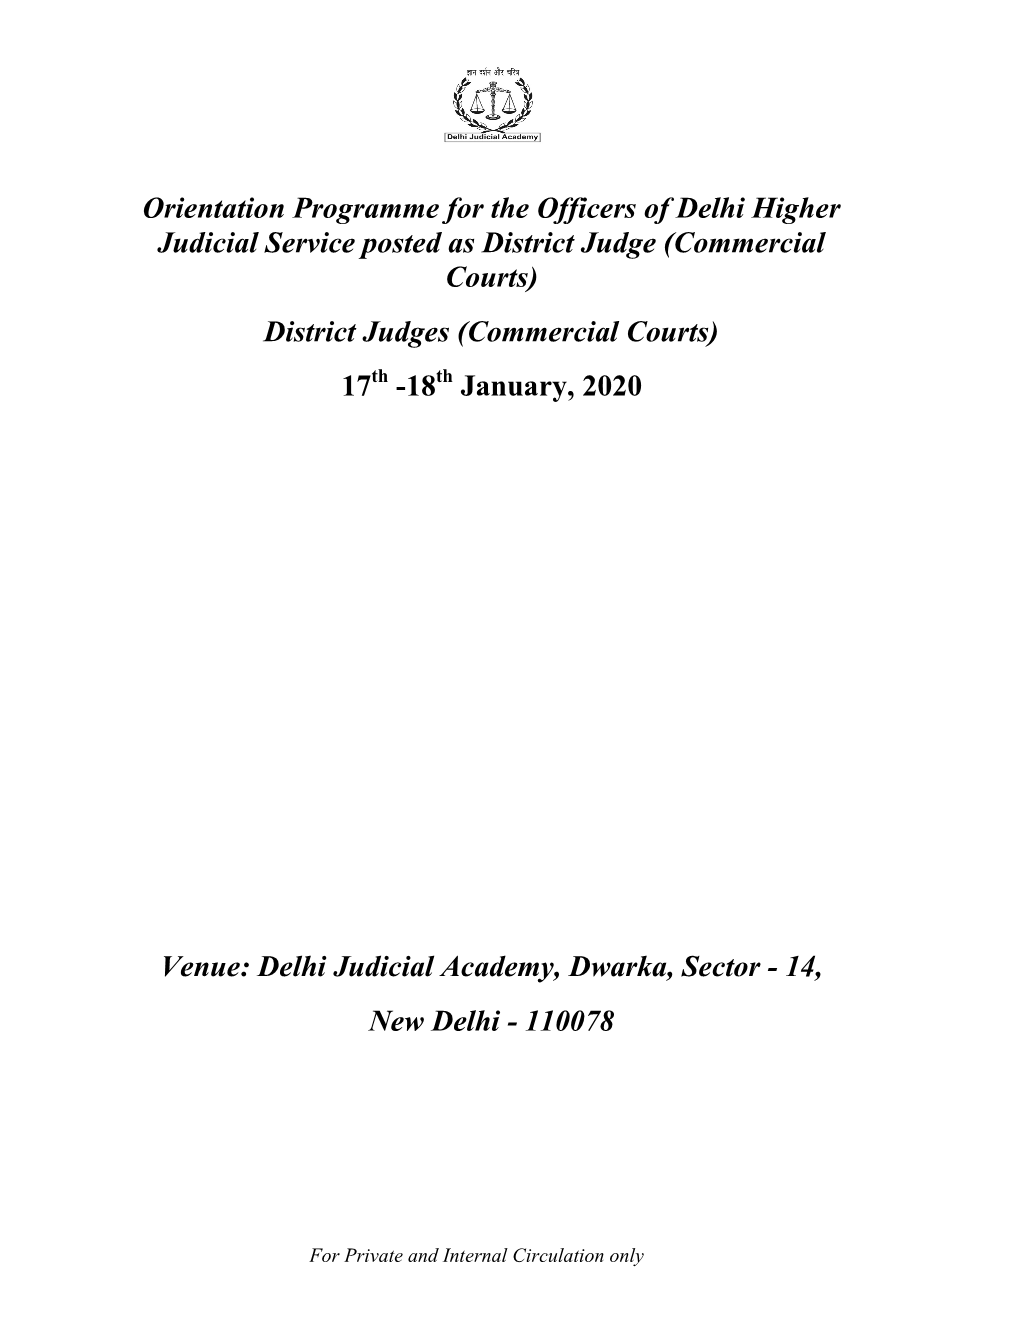 Commercial Courts) District Judges (Commercial Courts) 17Th -18Th January, 2020